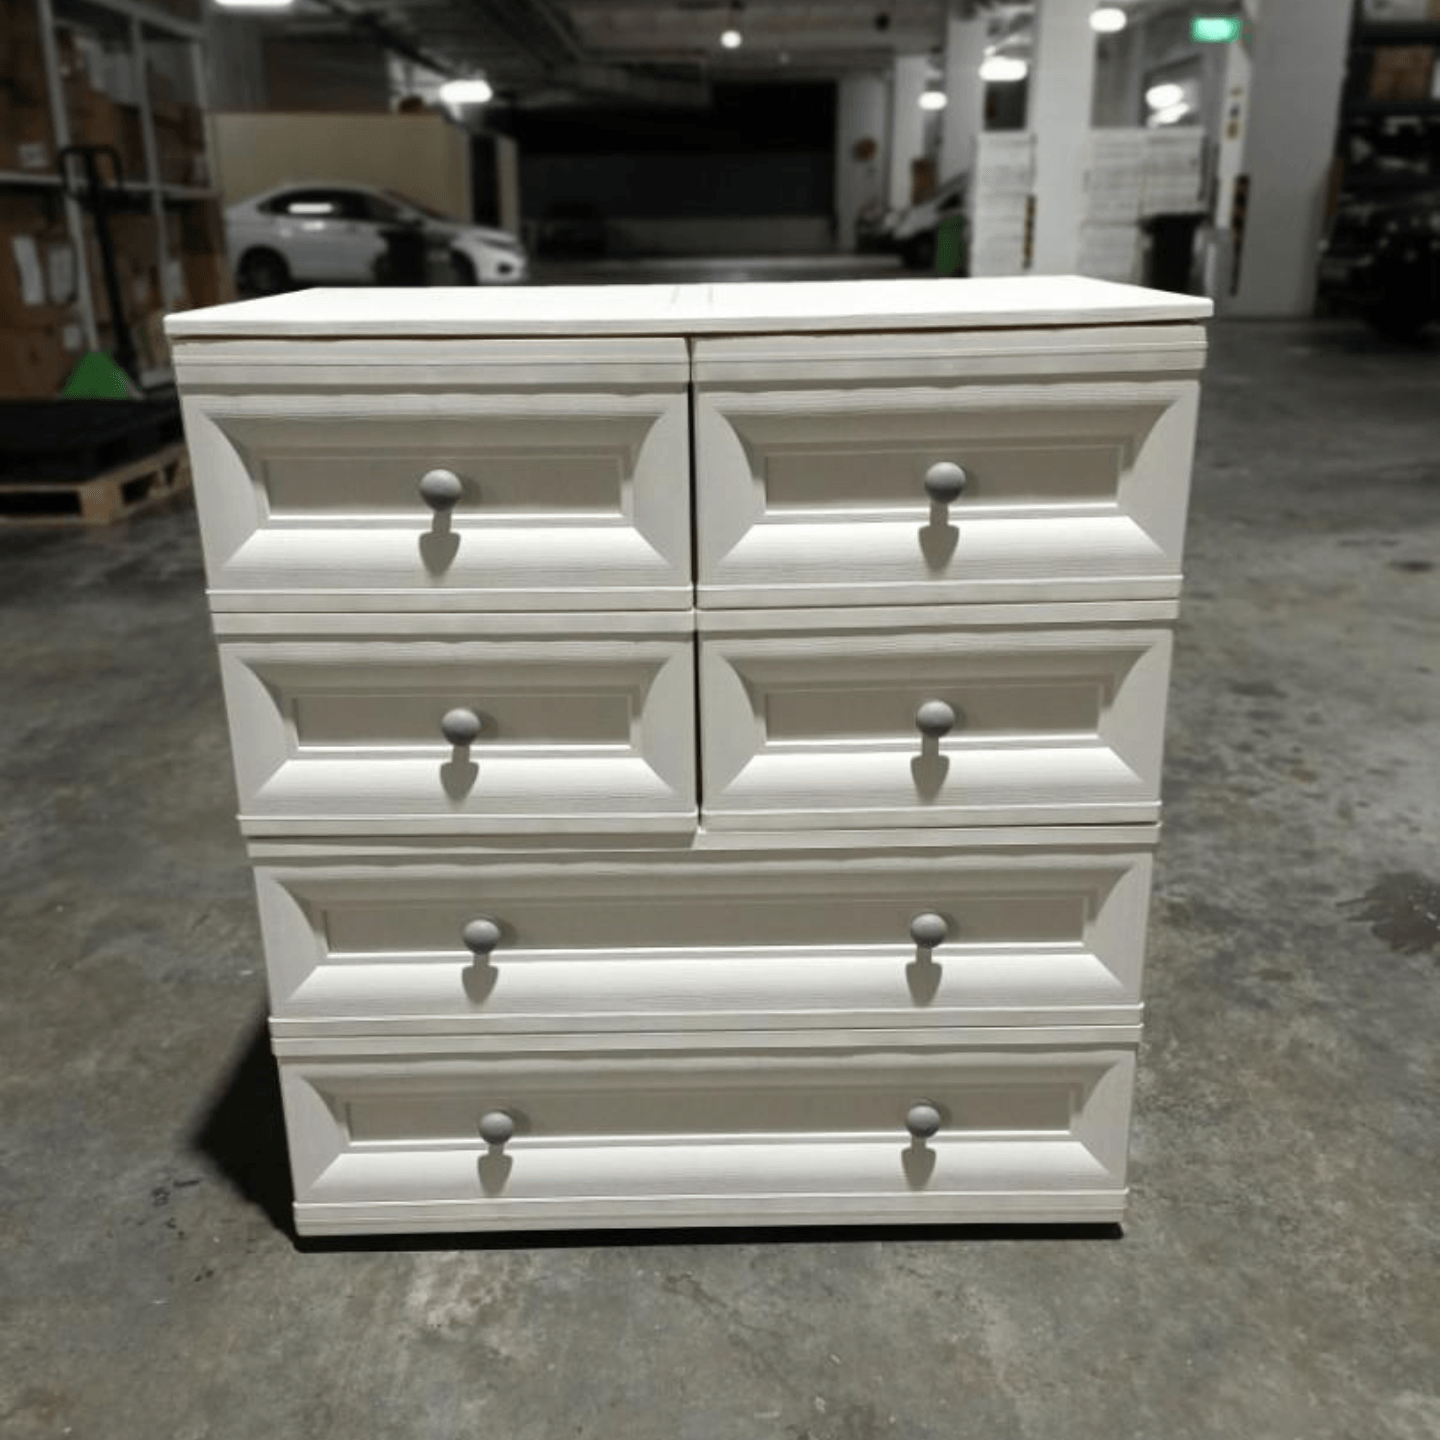 MUNA Plastic Chest of Drawers - MADE IN ITALY